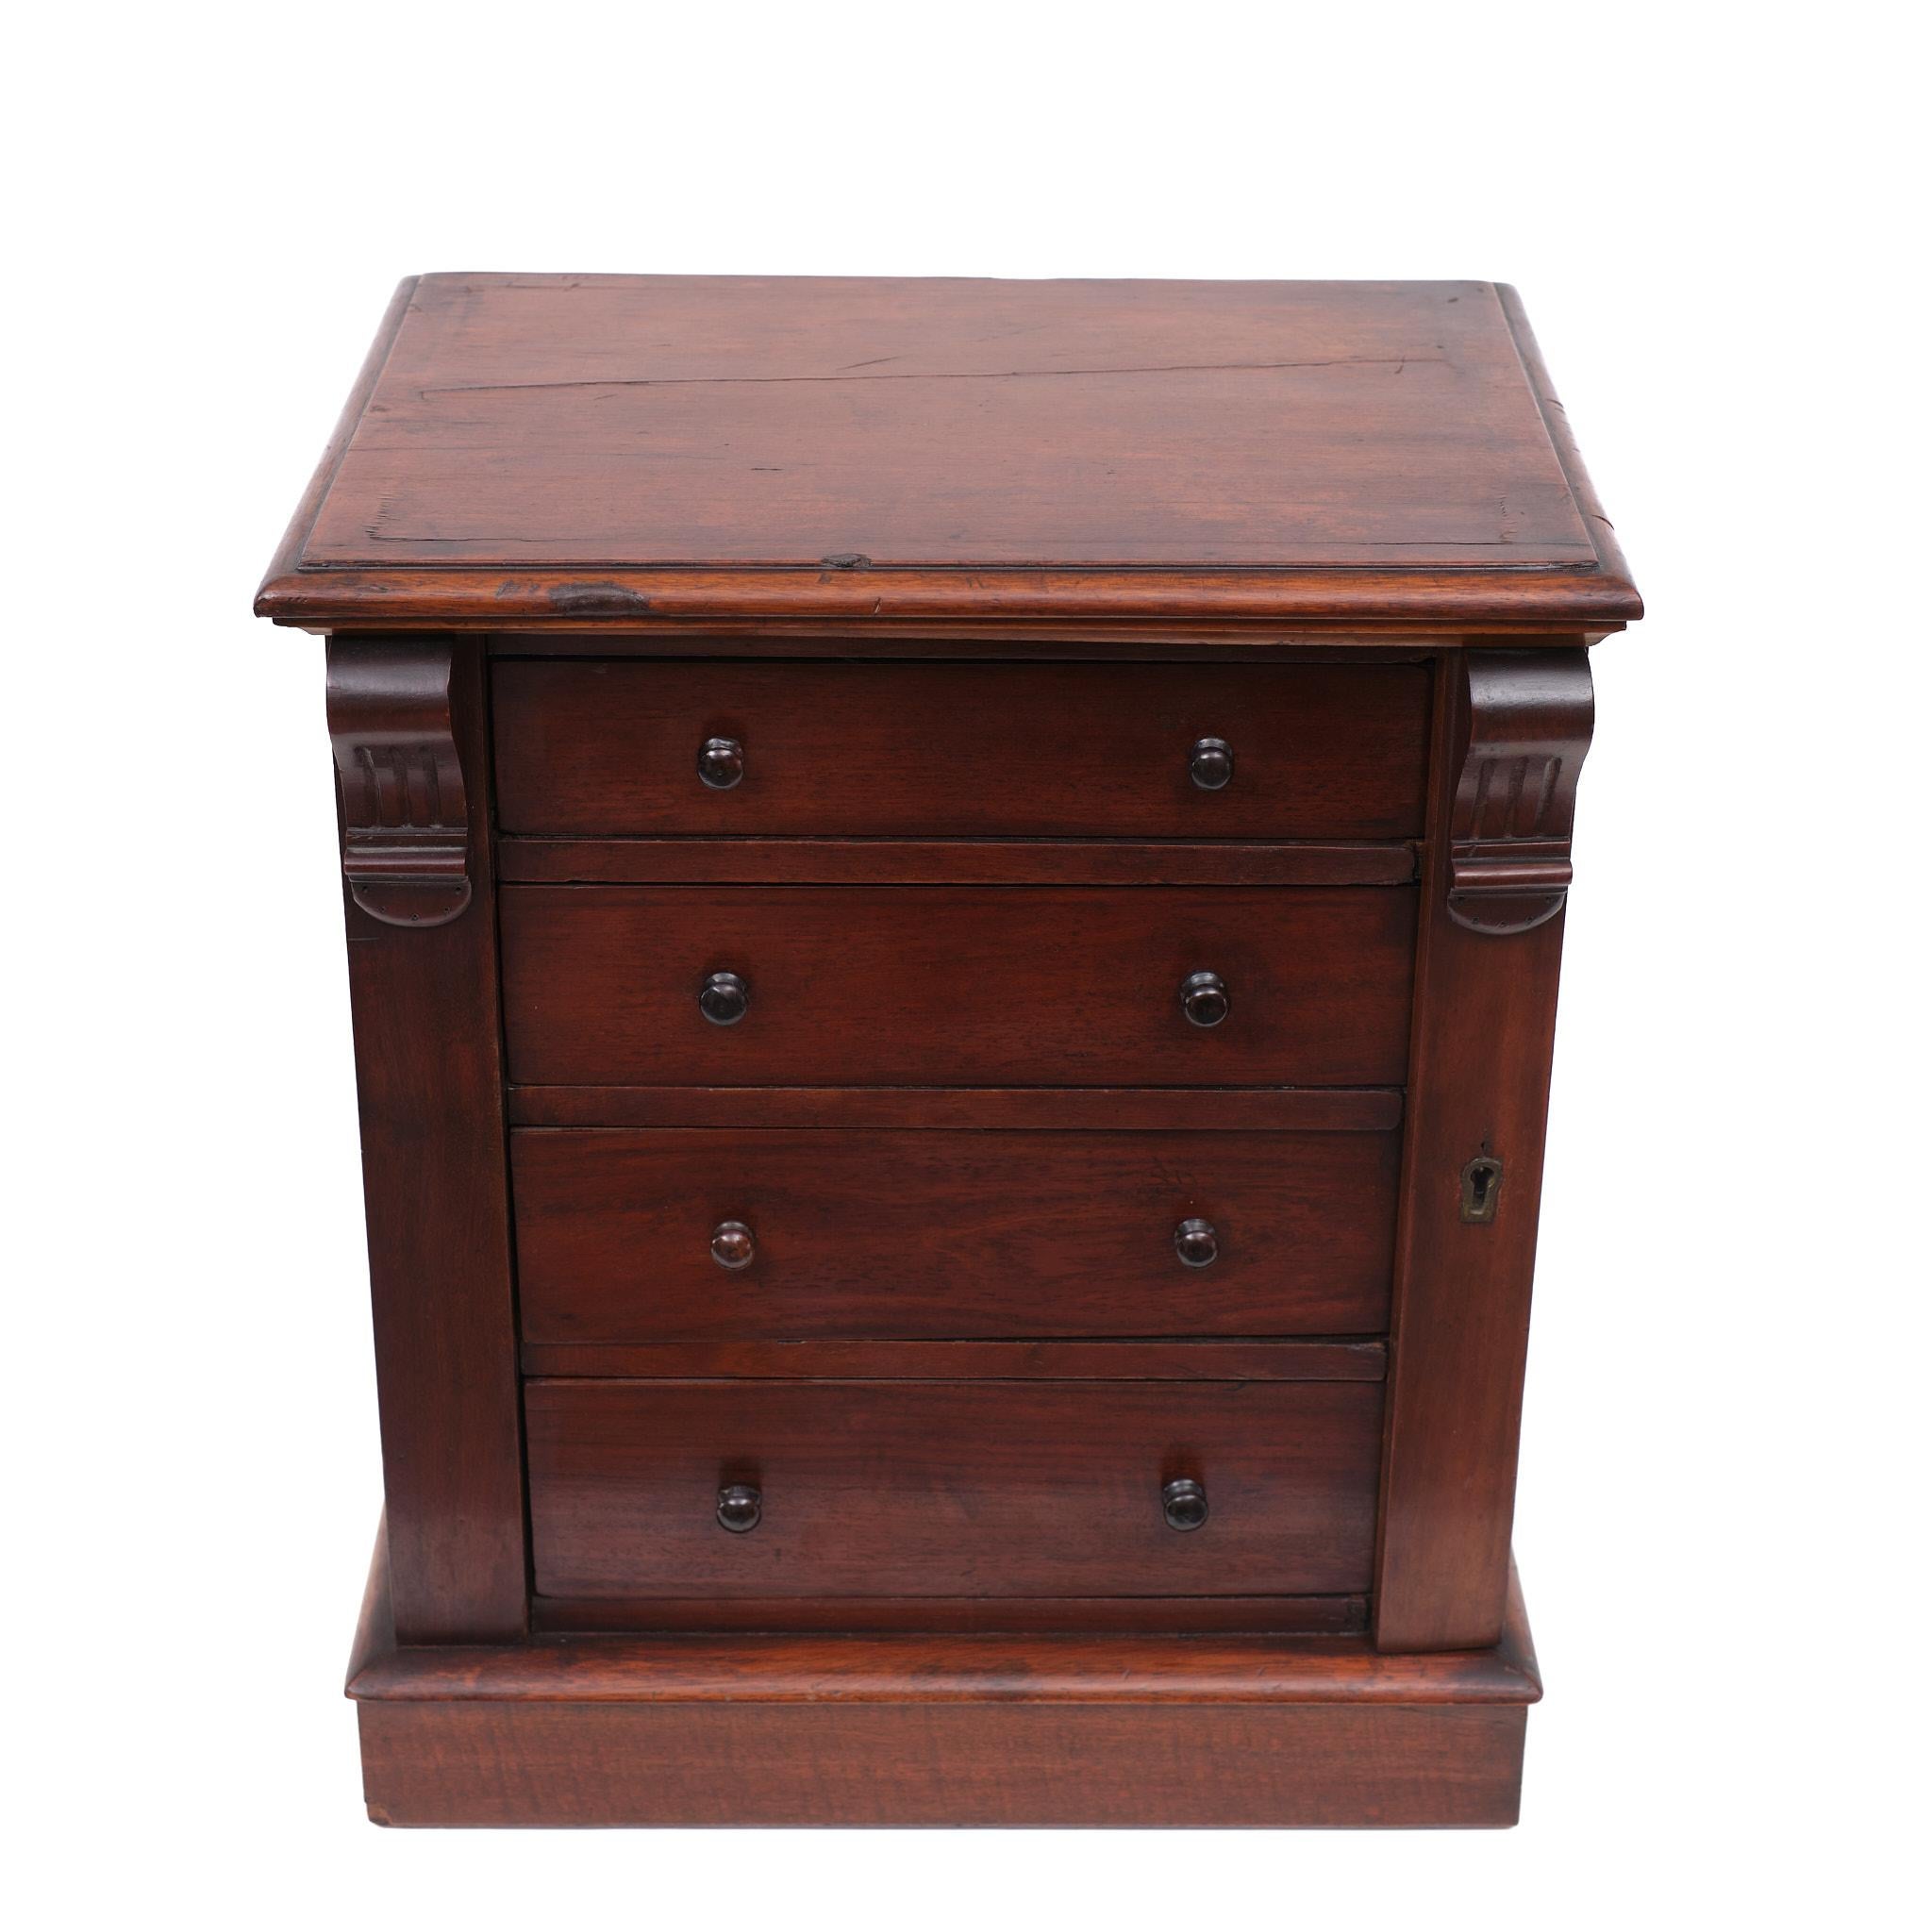 Beautiful miniature Wellington chest of drawers. Warm Mahogany color. 
All four drawers are locked by the hinged side pilaster on the right, terminating on a plain plinth base. Original key. Very nice Brass hardware.